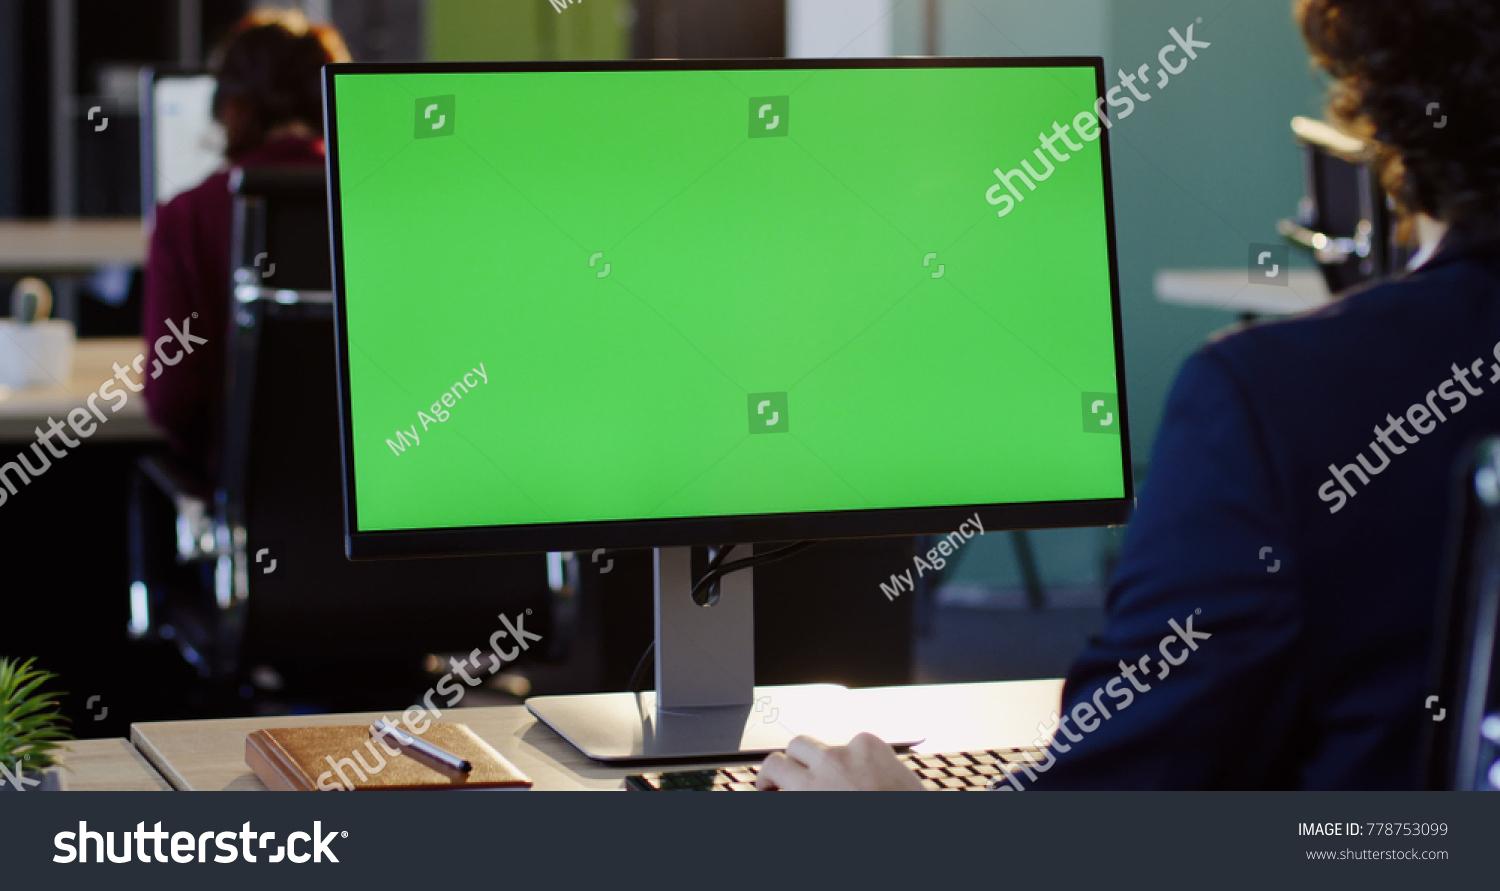 Businessman working on the PC computer and typing on the keyboard in the office. Rear view. Computer green screen, chroma key. Indoor #778753099